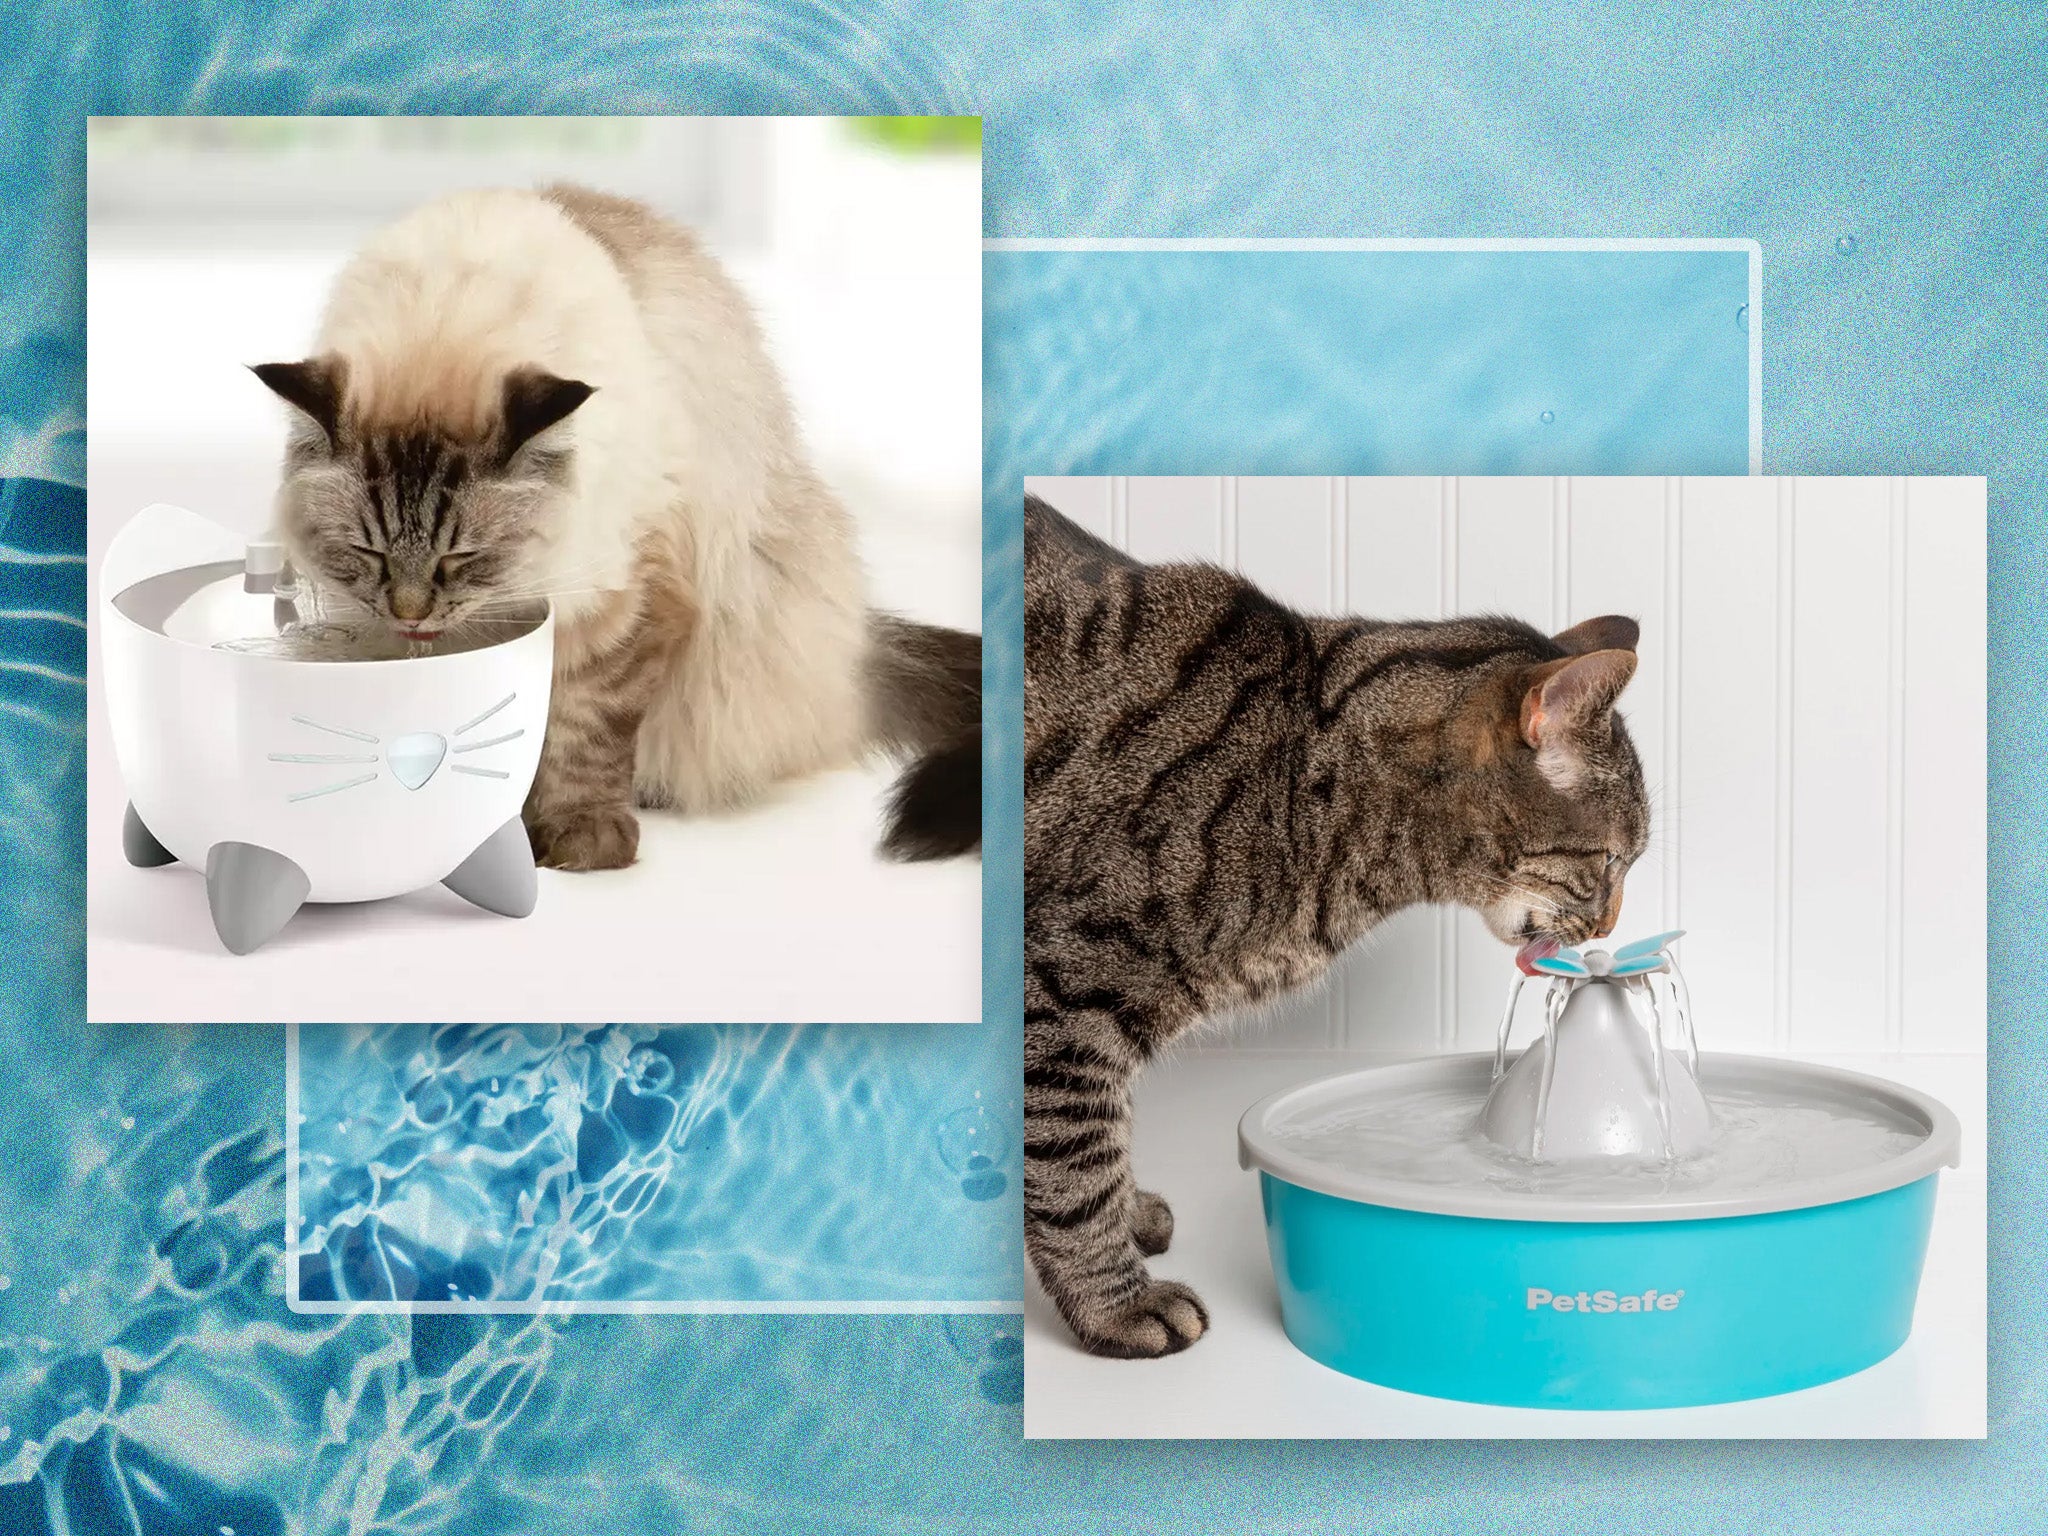 H2O promotes your cat’s good kidney health, replenishes their cells and wards off nasty infections